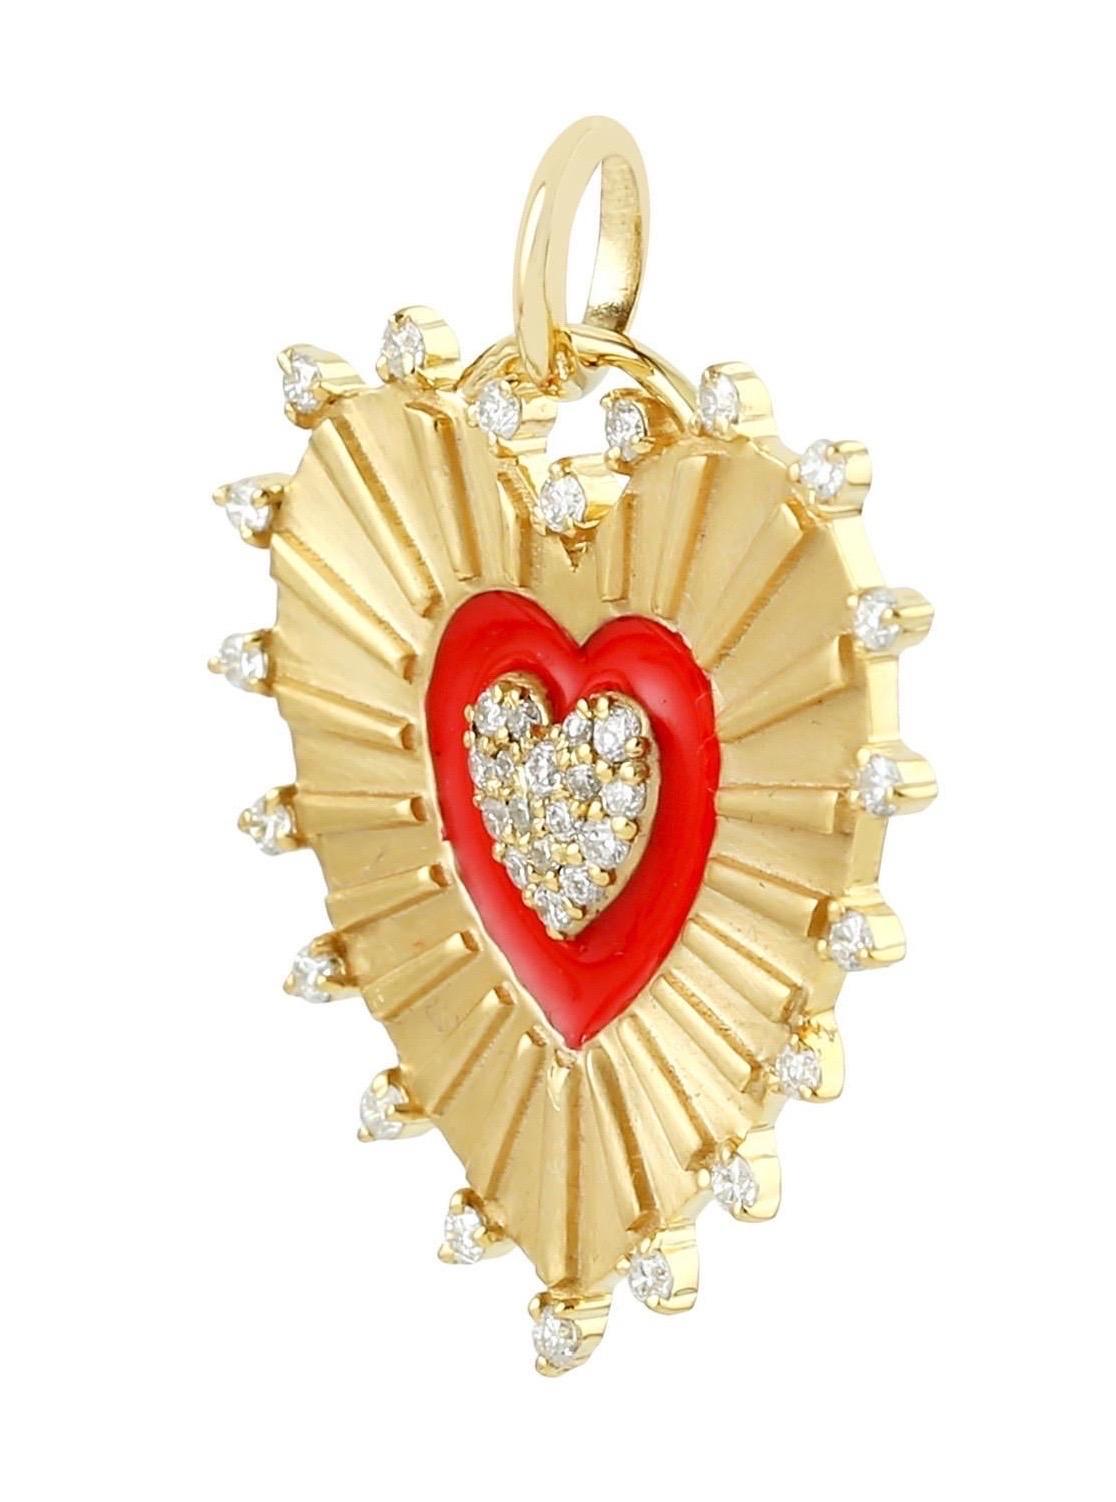 The 14 karat gold enamel pendant is hand set with .25 carats of sparkling diamonds. 

FOLLOW MEGHNA JEWELS storefront to view the latest collection & exclusive pieces. Meghna Jewels is proudly rated as a Top Seller on 1stdibs with 5 star customer